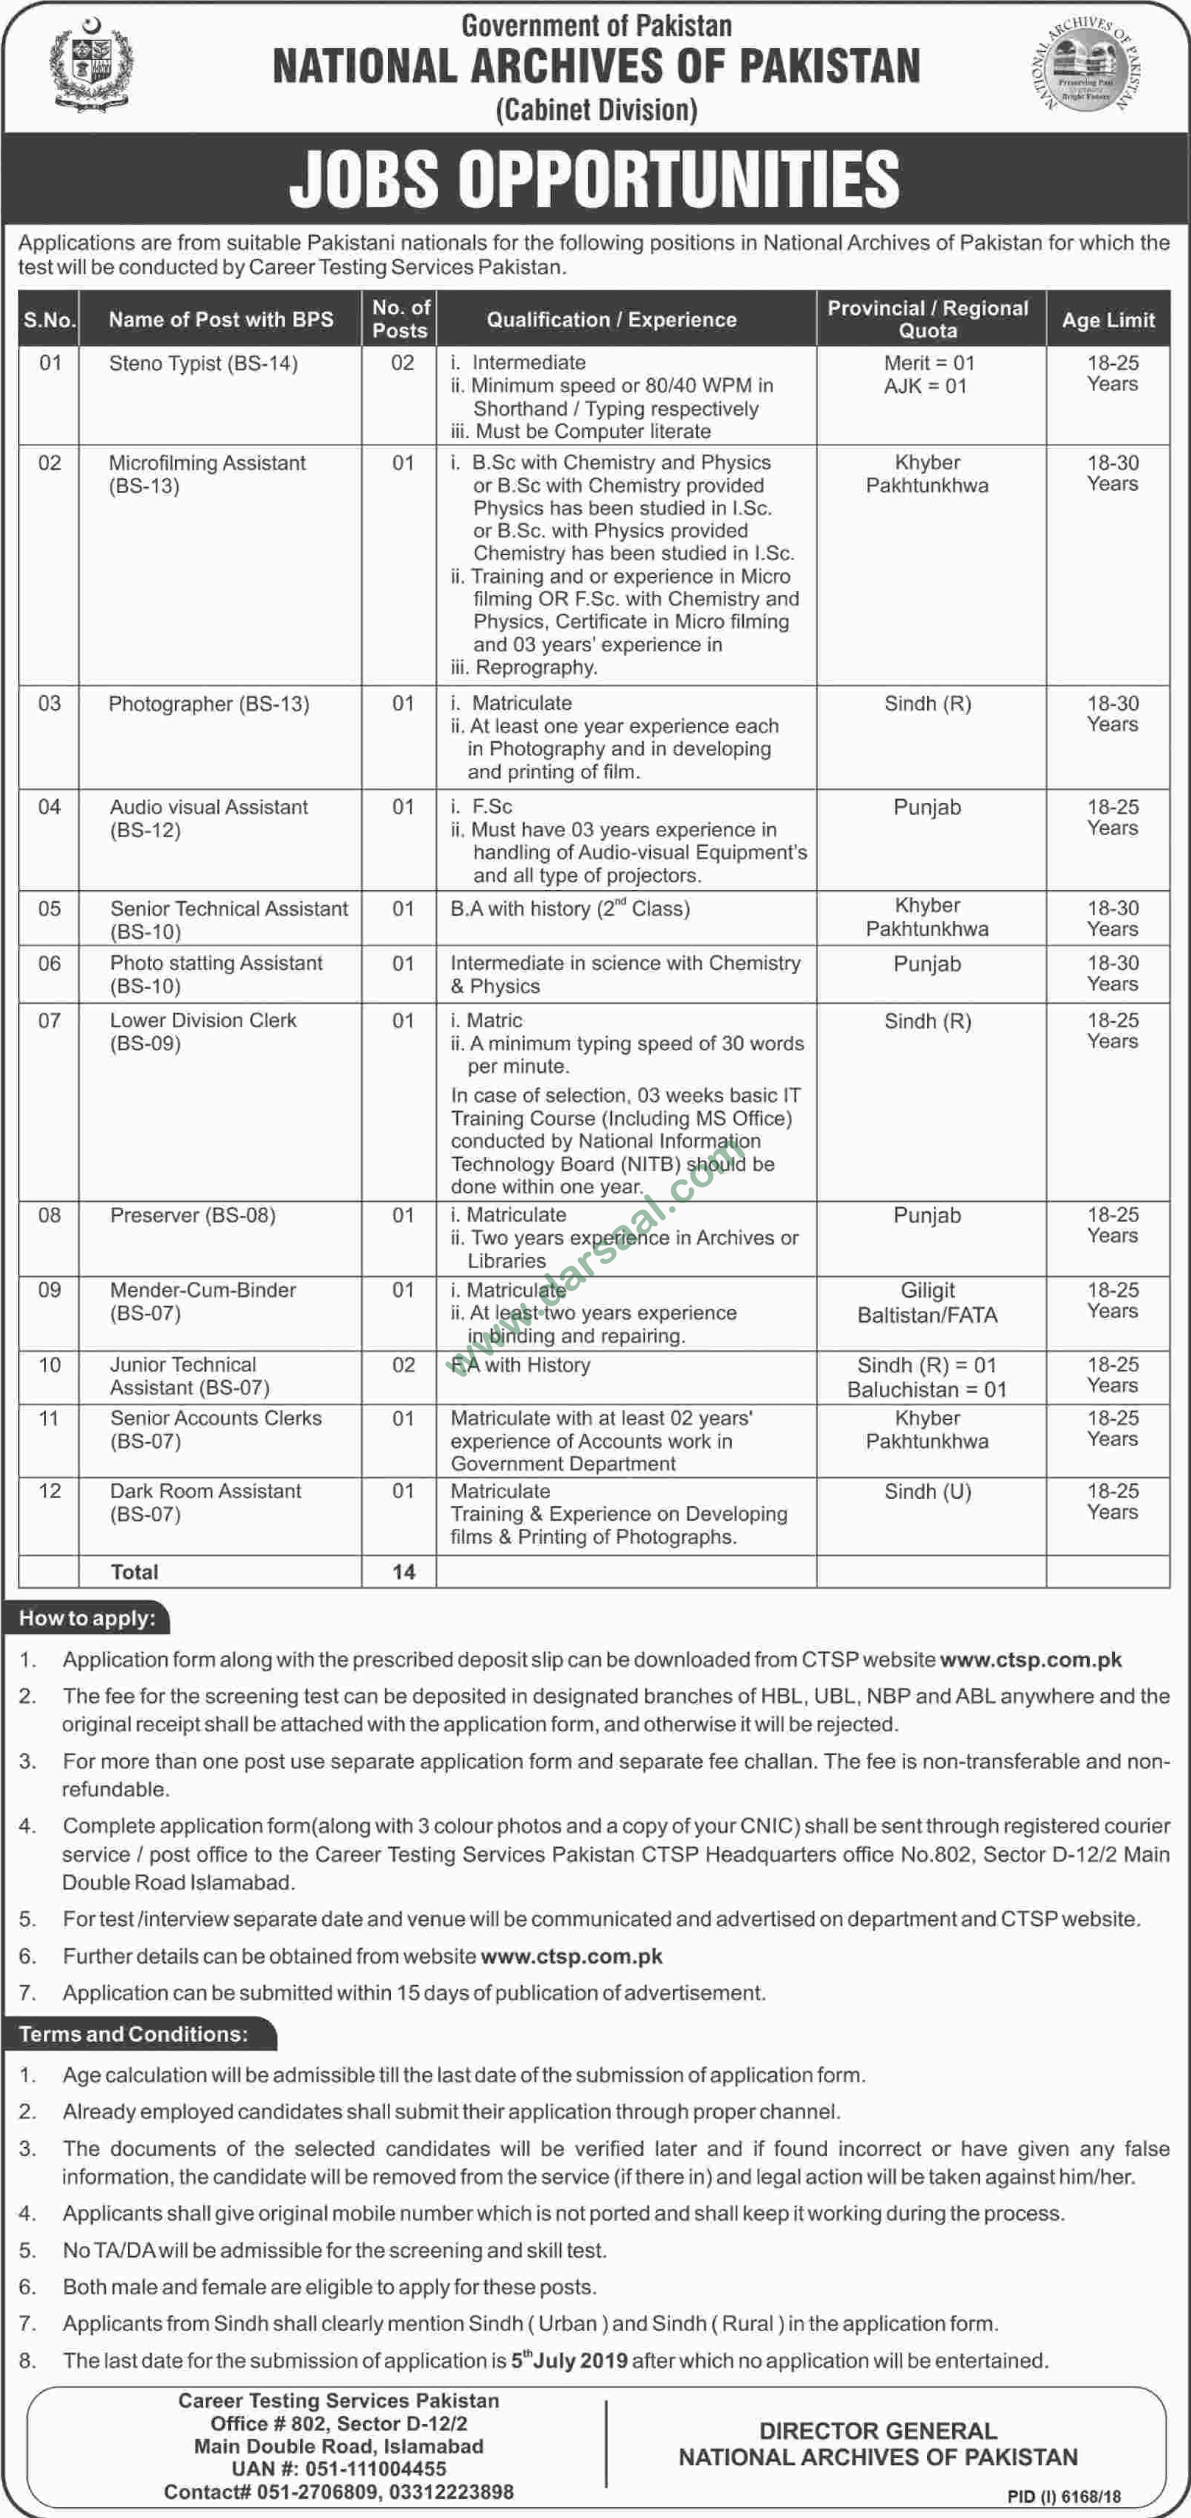 Senior Technical Assistant Jobs in National Archives of Pakistan in Islamabad - Jun 23, 2019